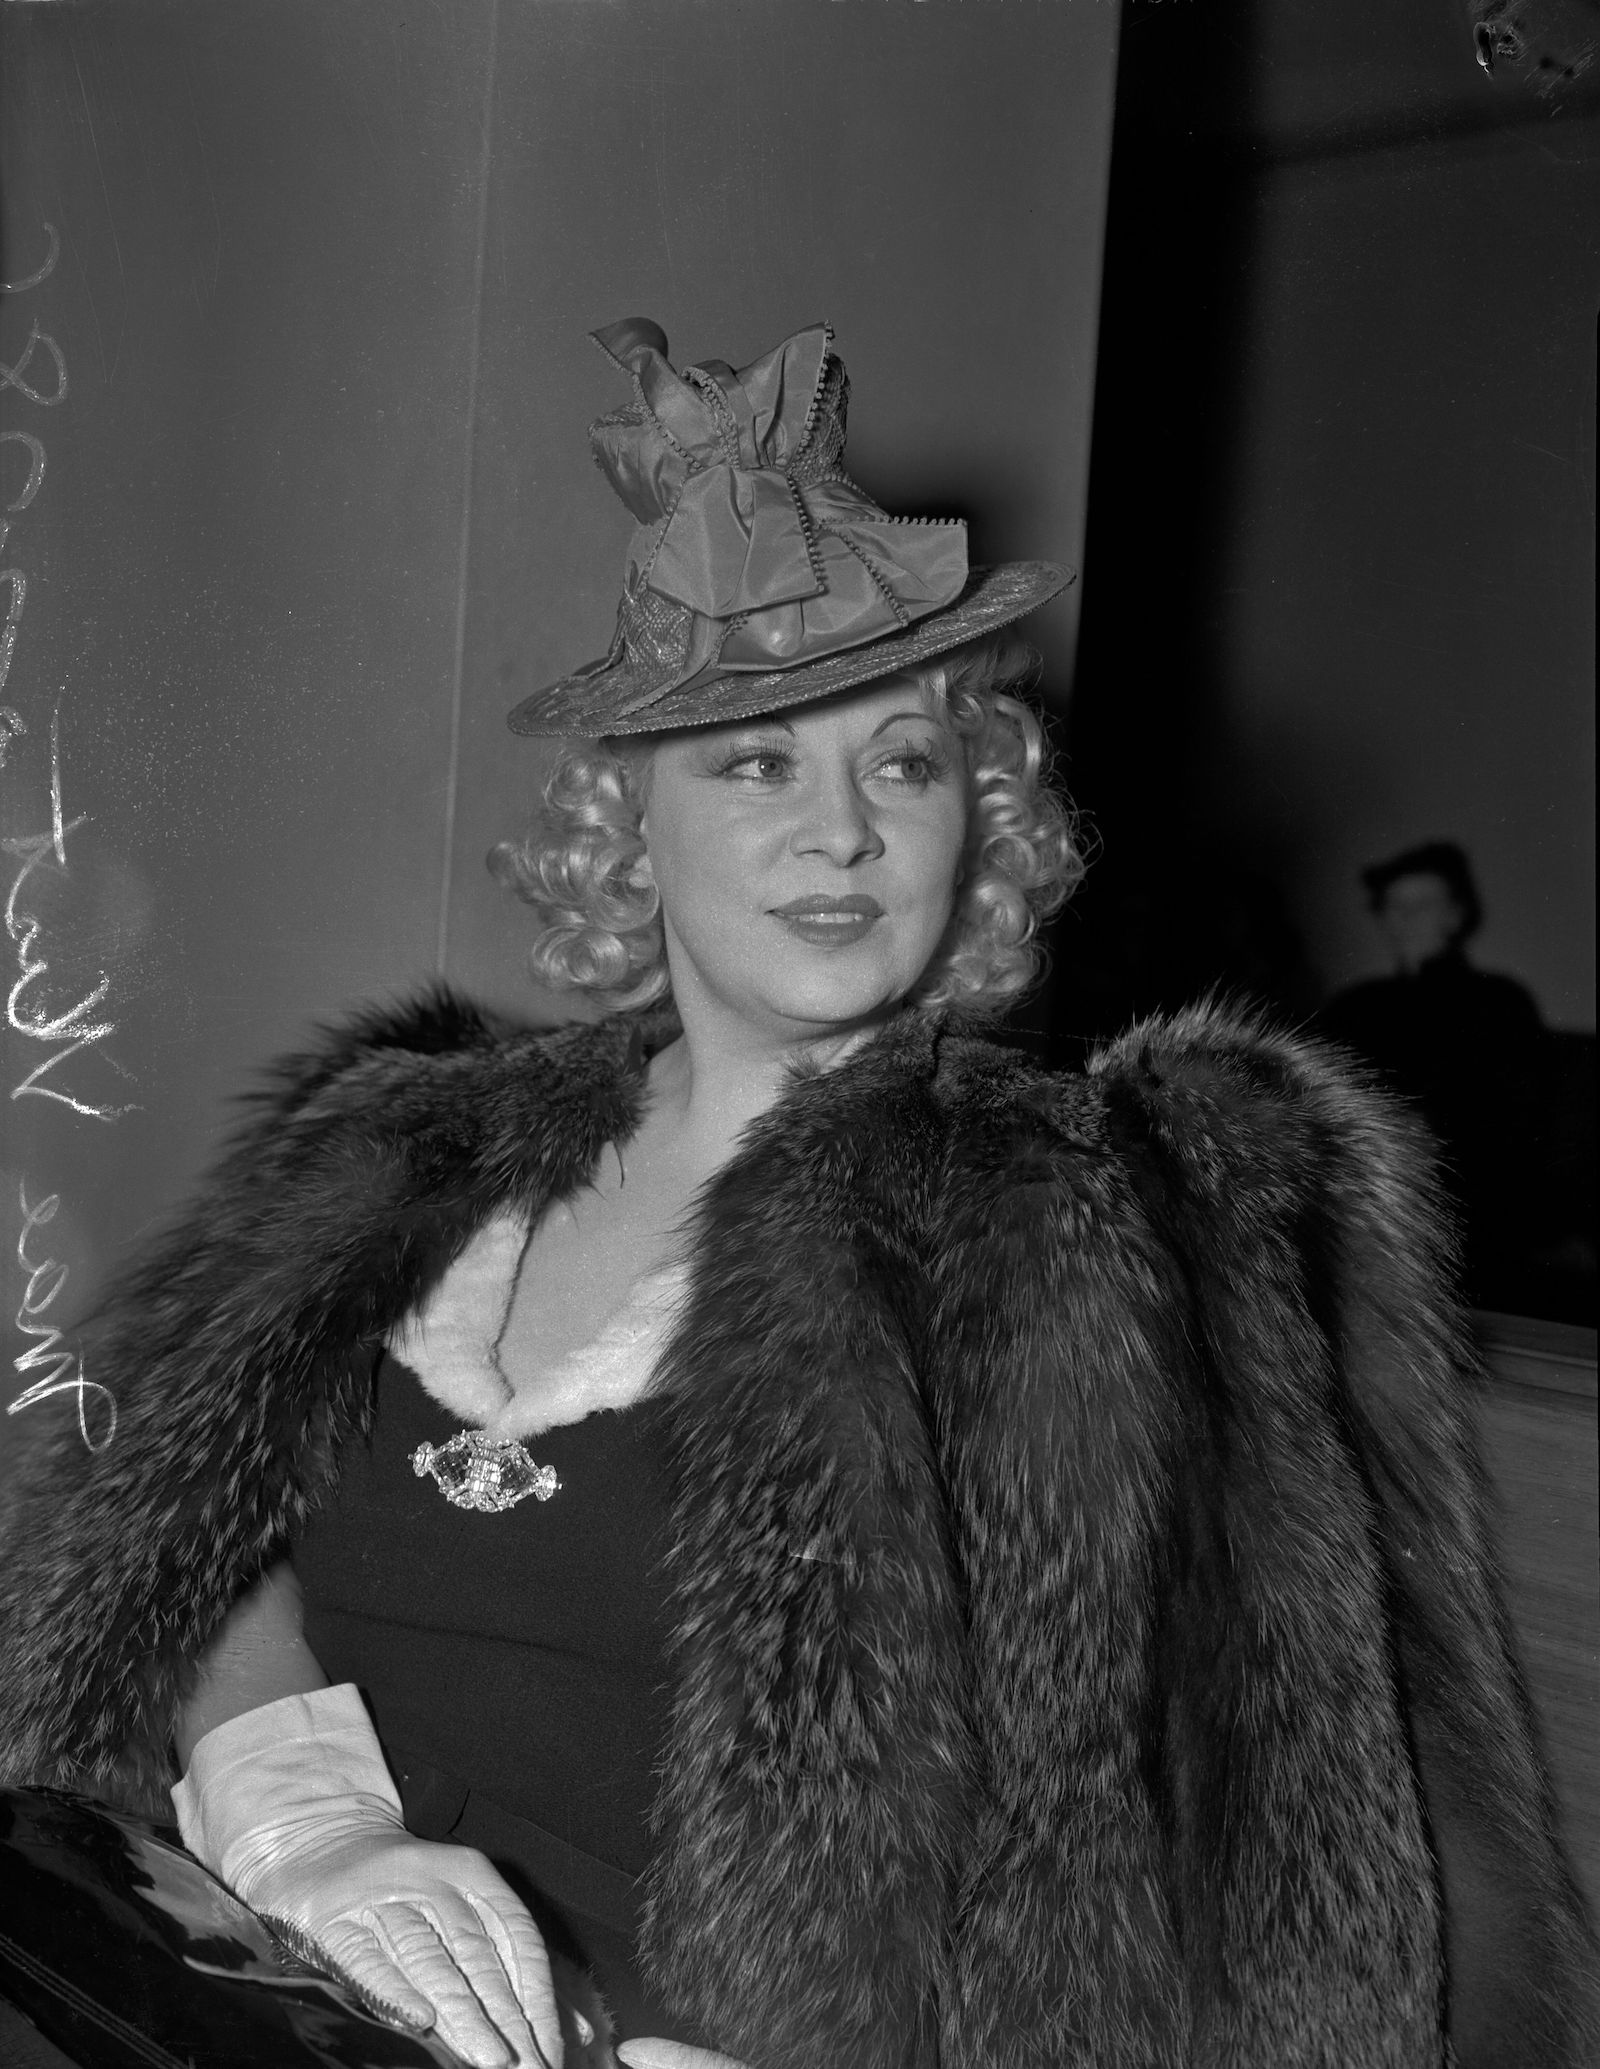 Mae West in court during questioning about earnings from her role in the movie She Done Him Wrong, Los Angeles, 1940. University of California, Los Angeles. Library. Department of Special Collections (CC BY 4.0 DEED).